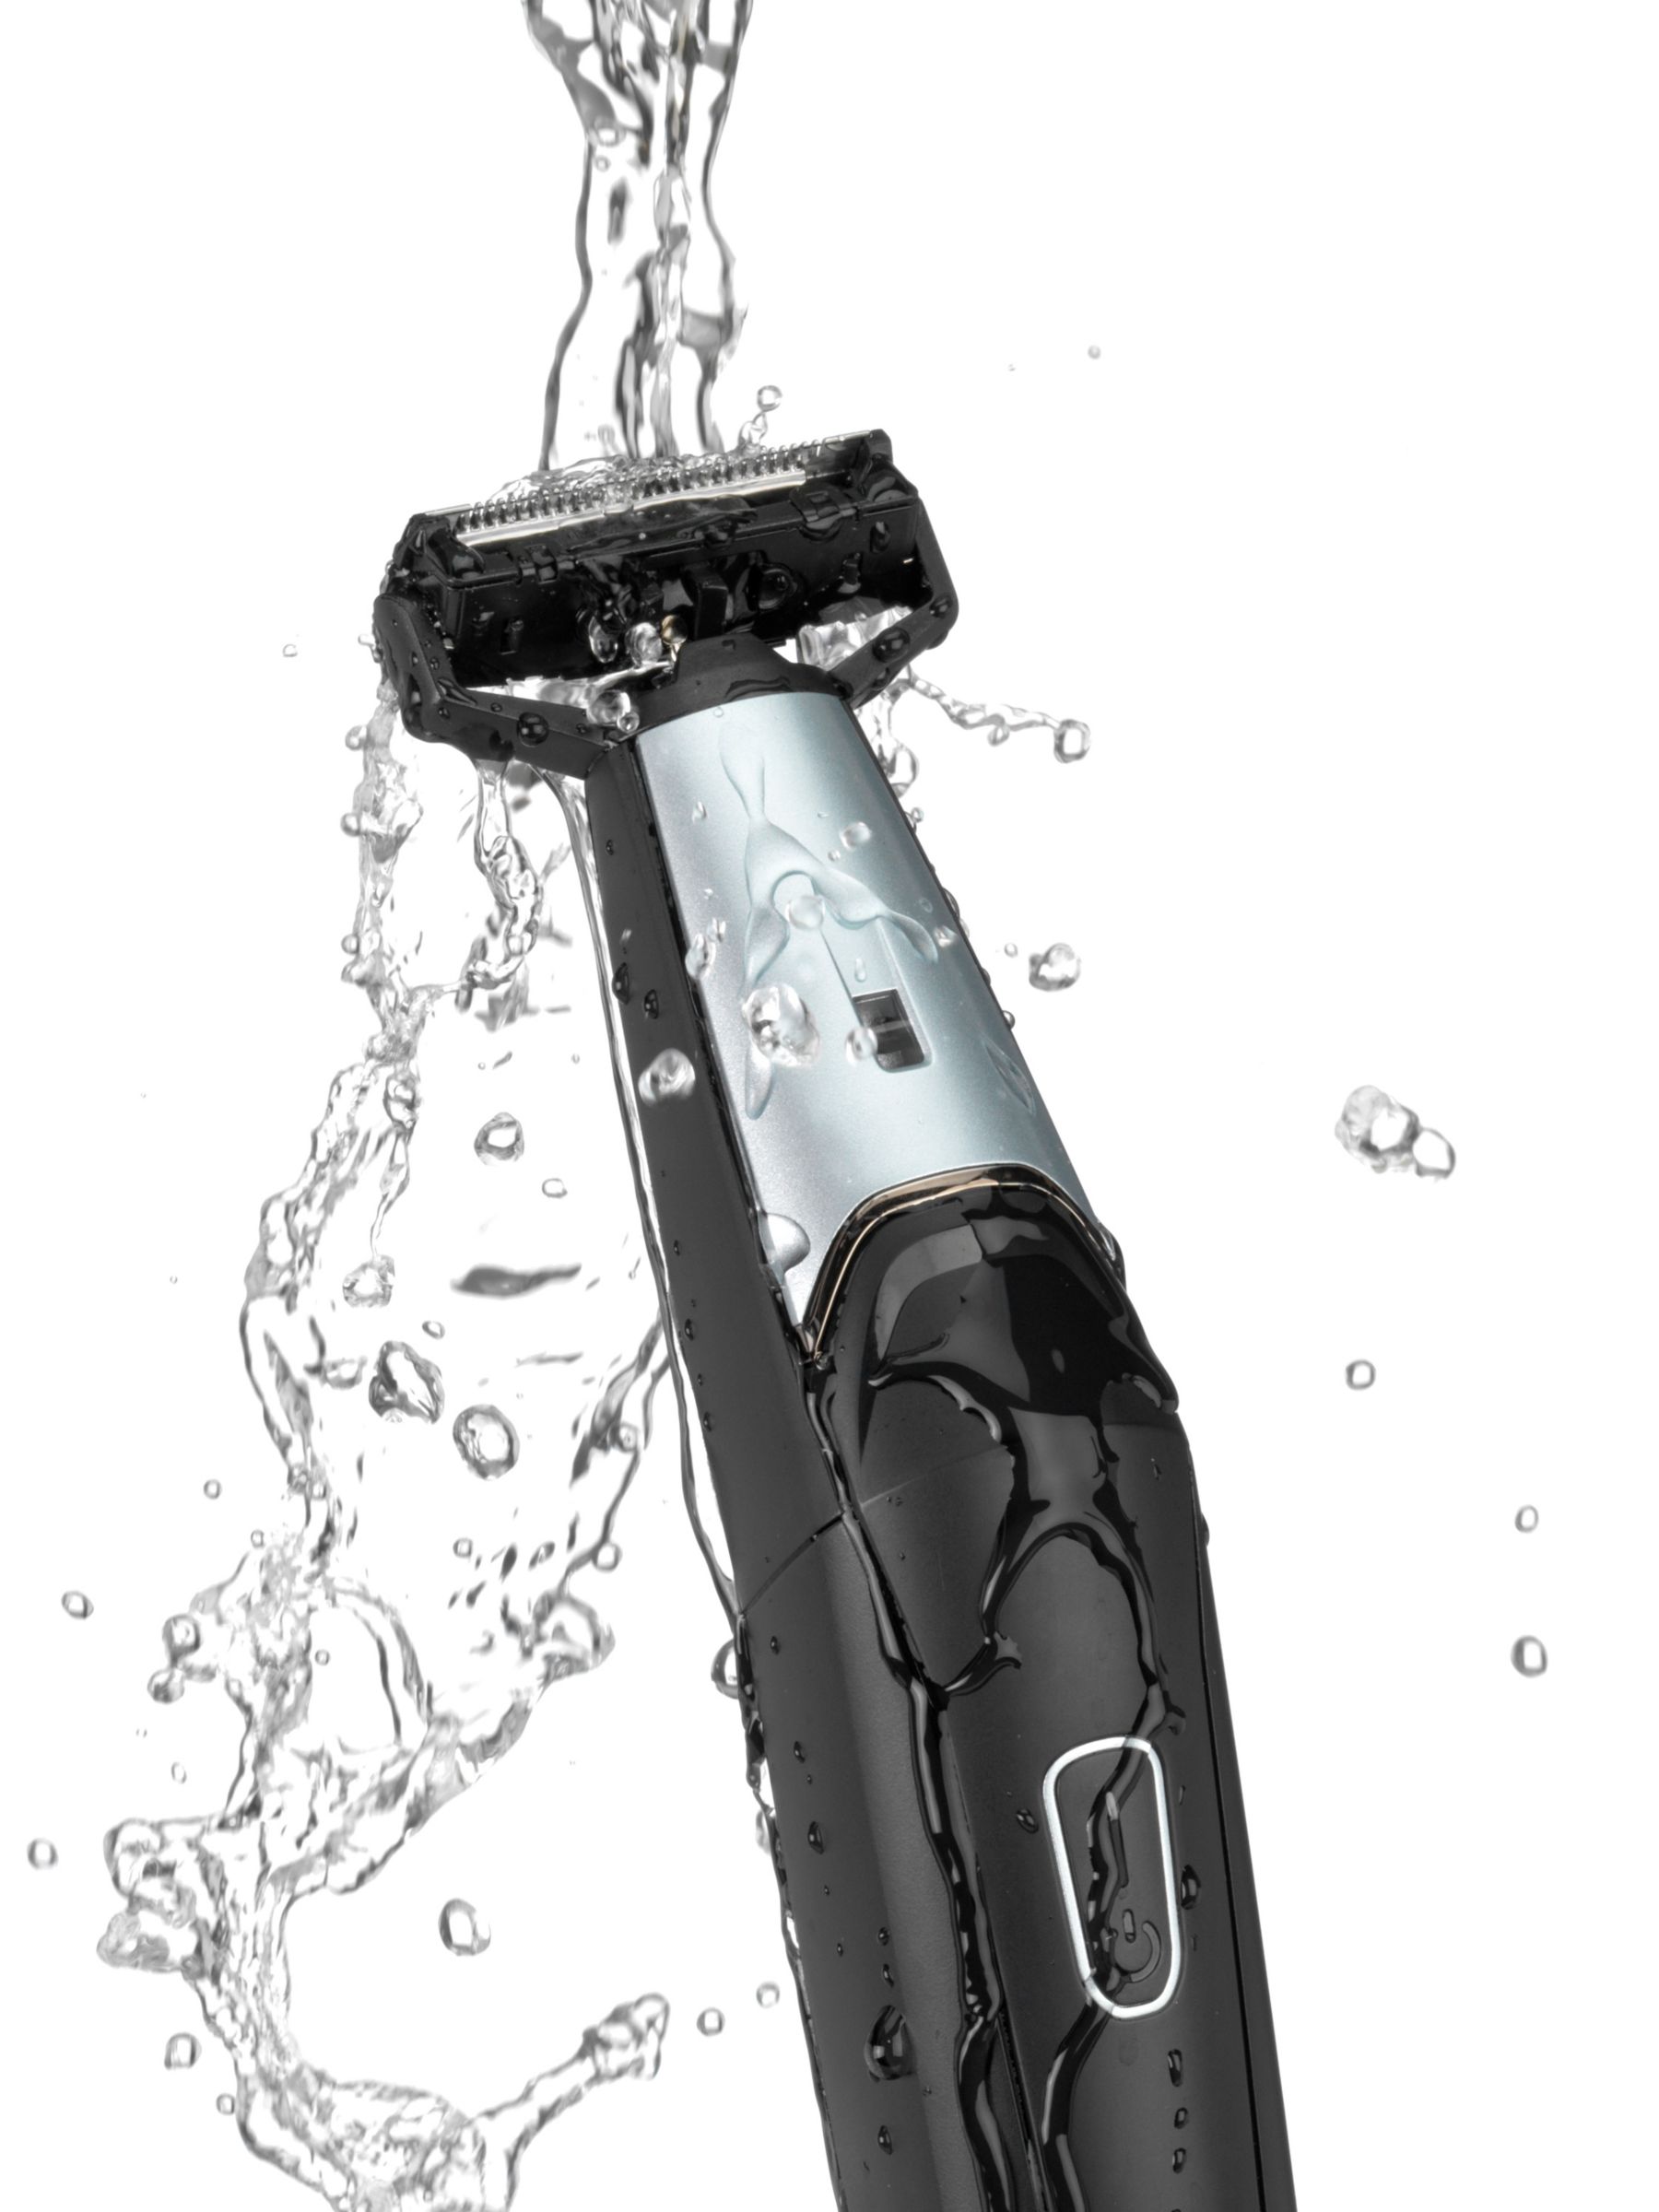 BaByliss Triple S Stubble, Shadow, Shave & Beard Trimmer, Black